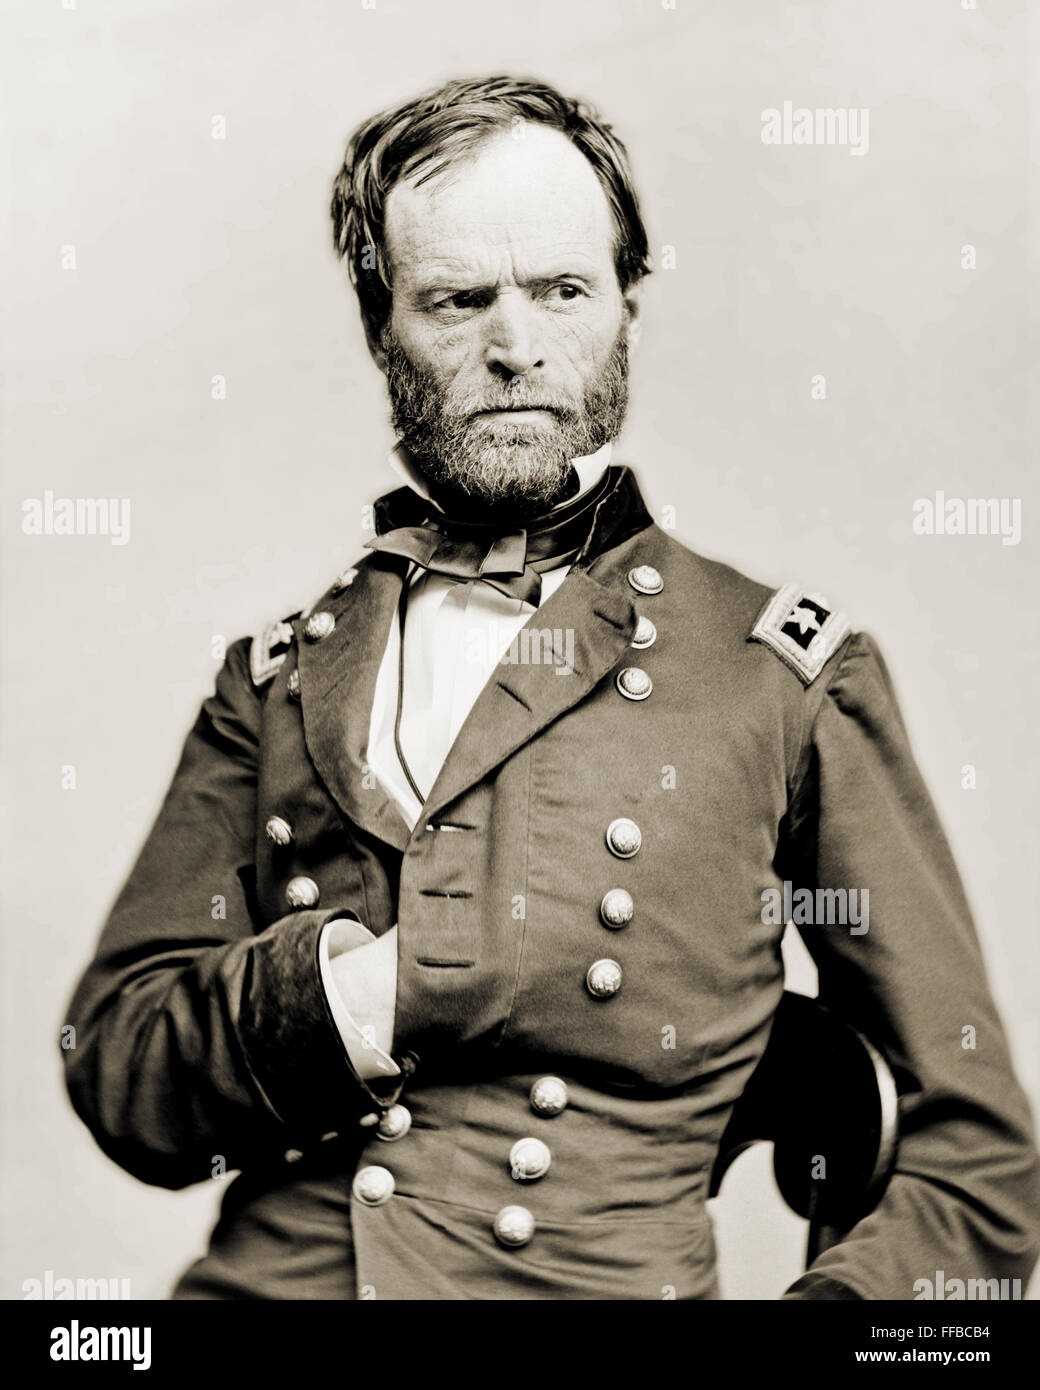 Portrait of Maj. Gen. William T. Sherman, officer of the Federal Army. Brady National Photographic Art Gallery, Washington, D.C., photographer.  Photographed between 1860 and 1865. Stock Photo